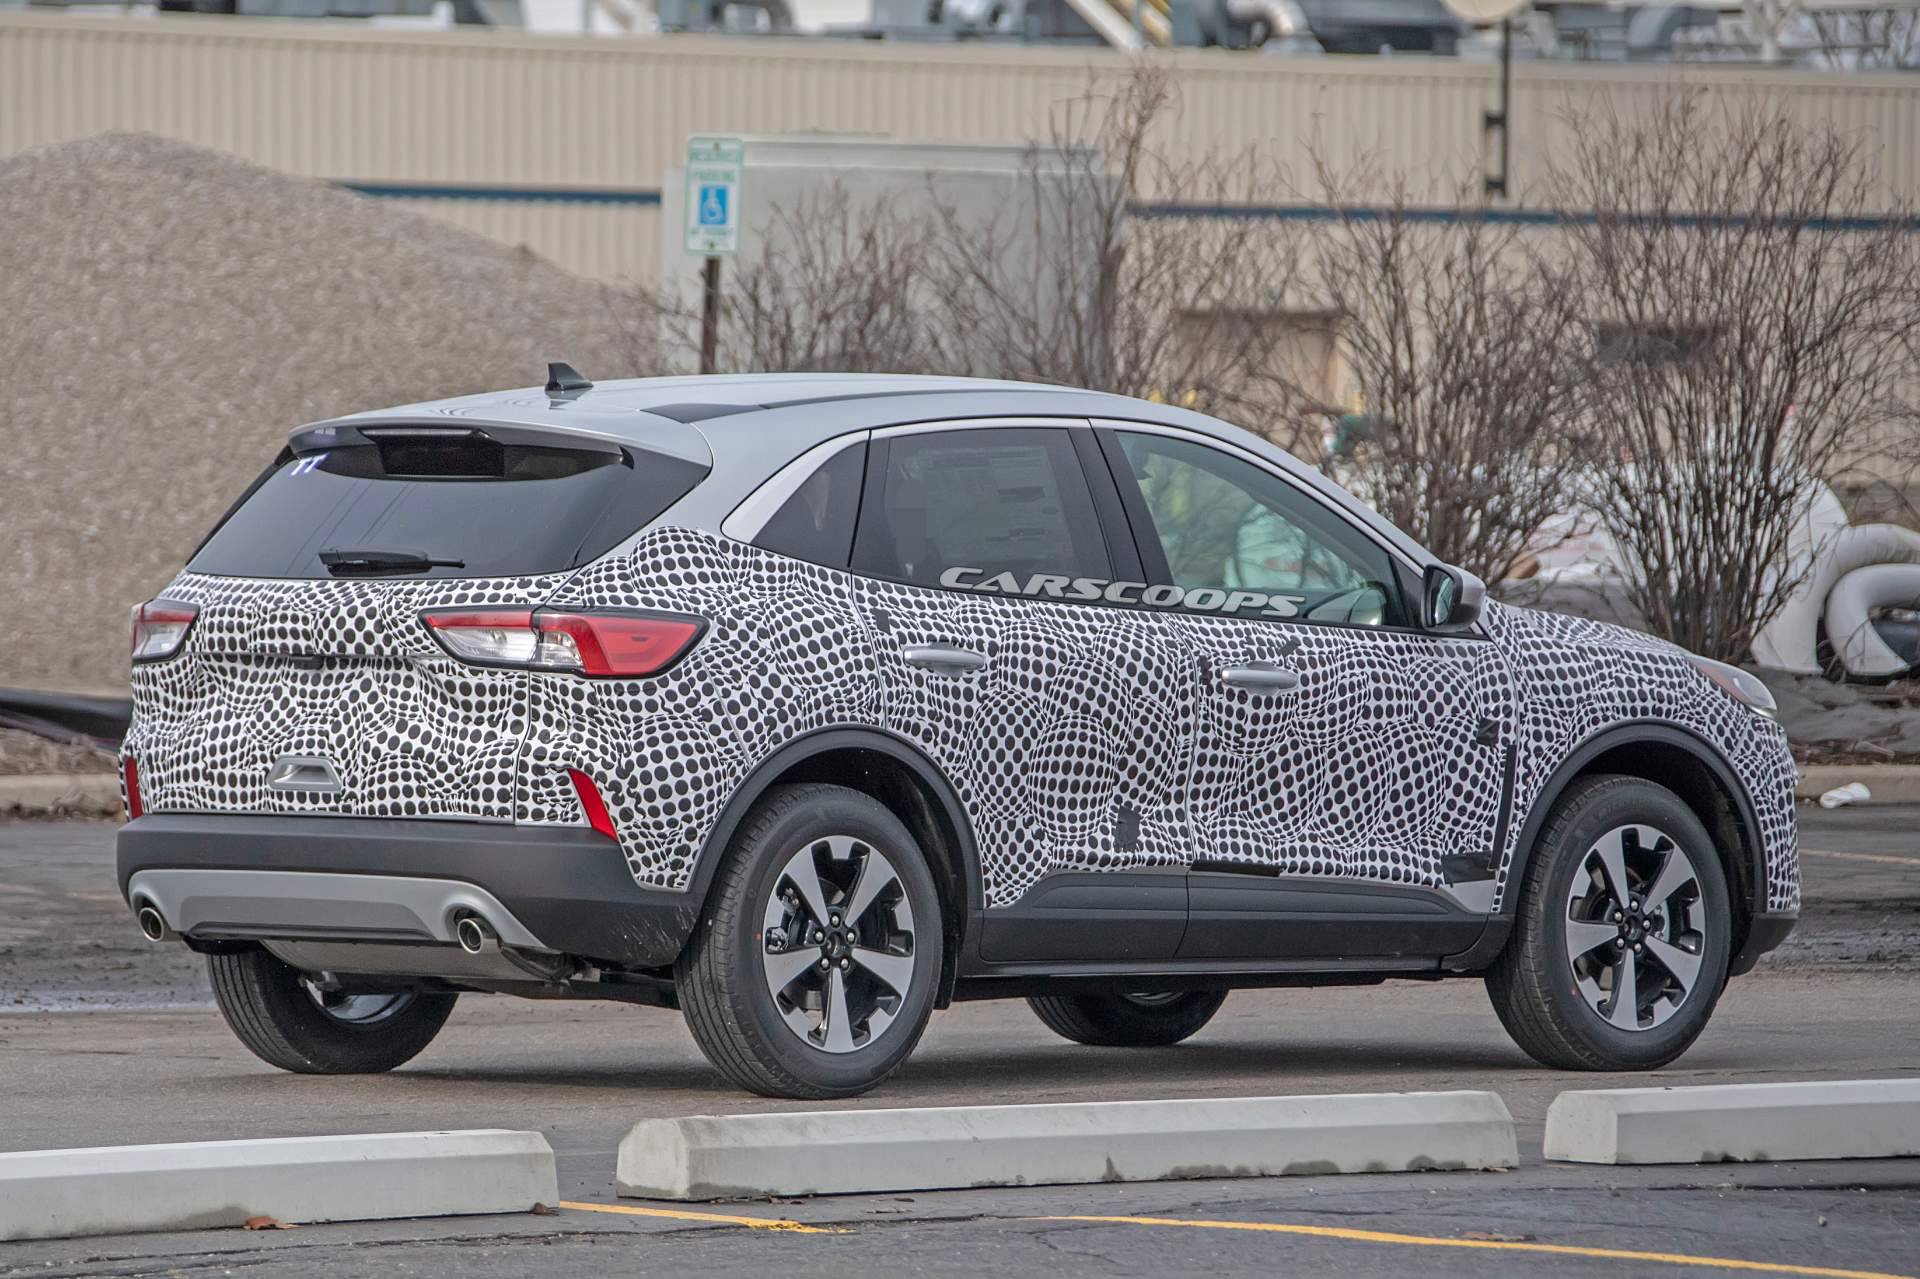 2020 Ford Escape (Kuga): Looks, Tech, Engines And Everything Else